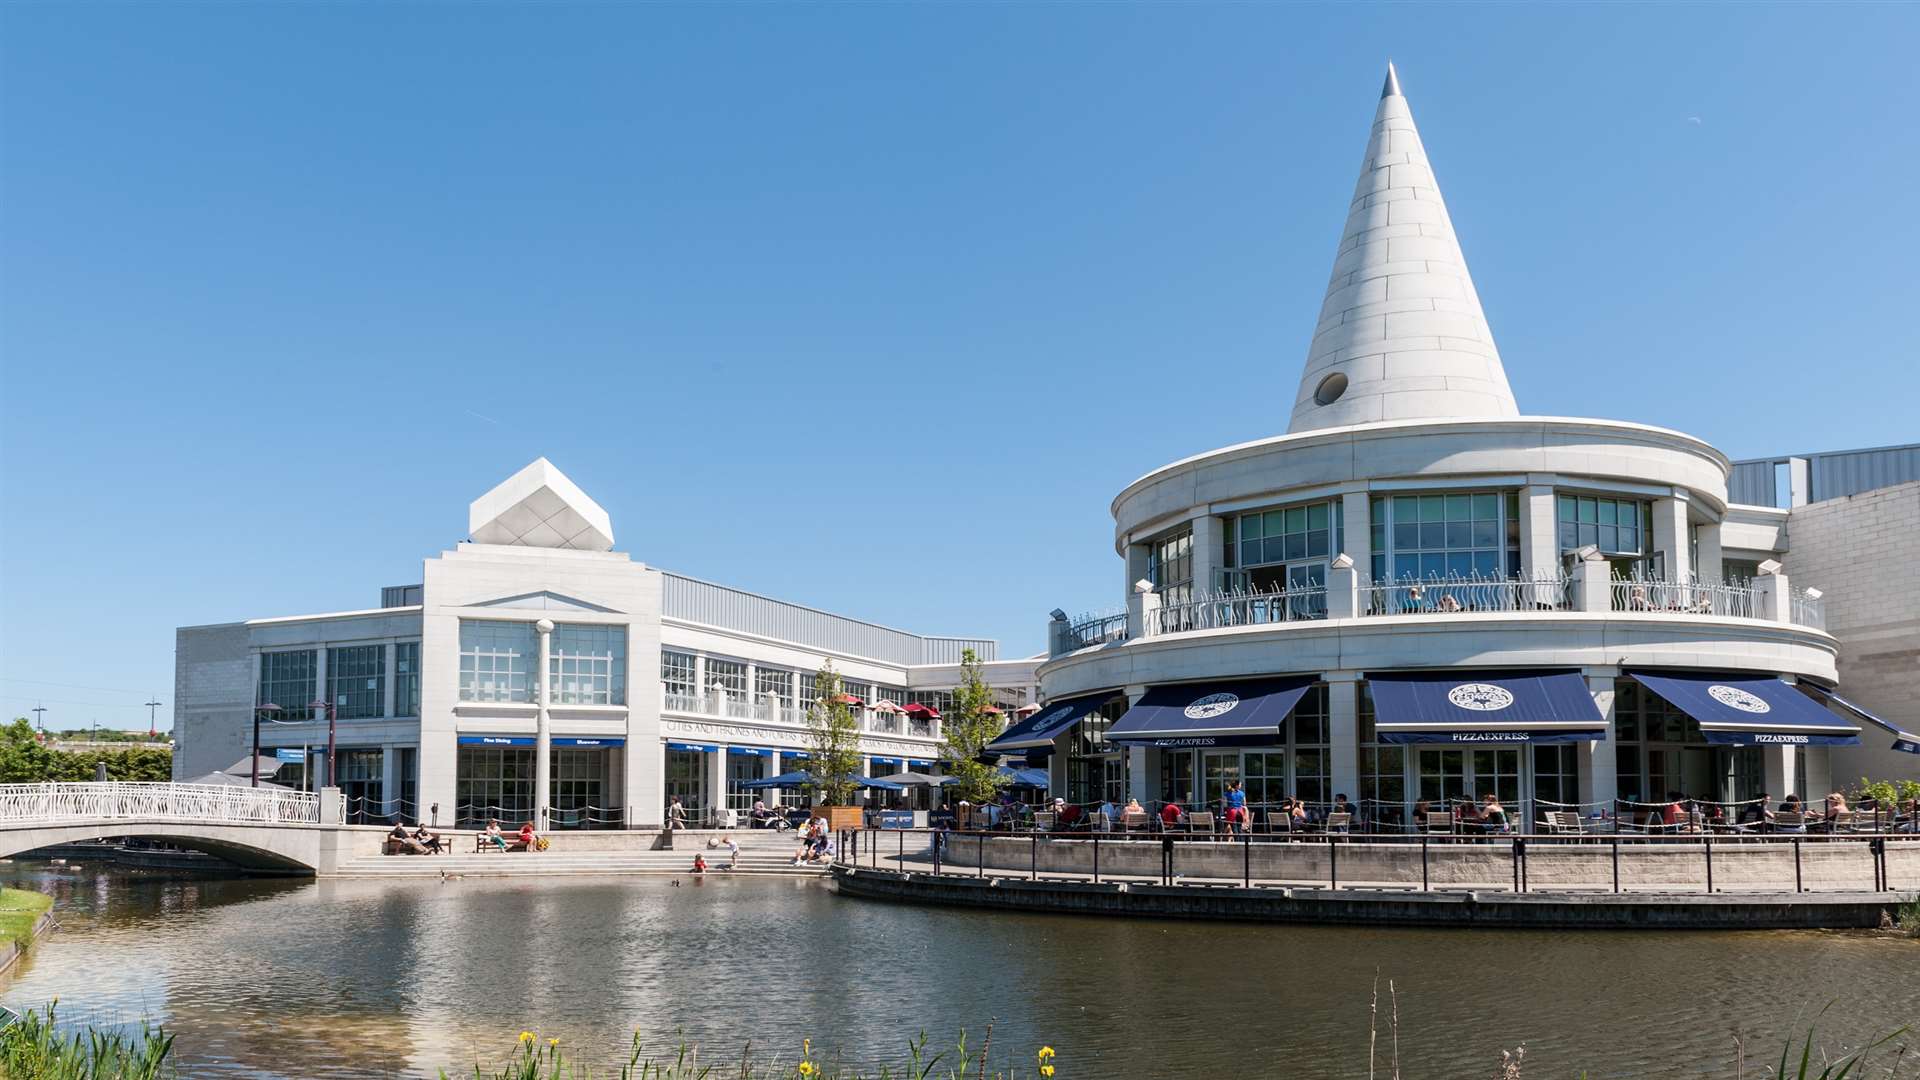 The Bluewater shopping centre